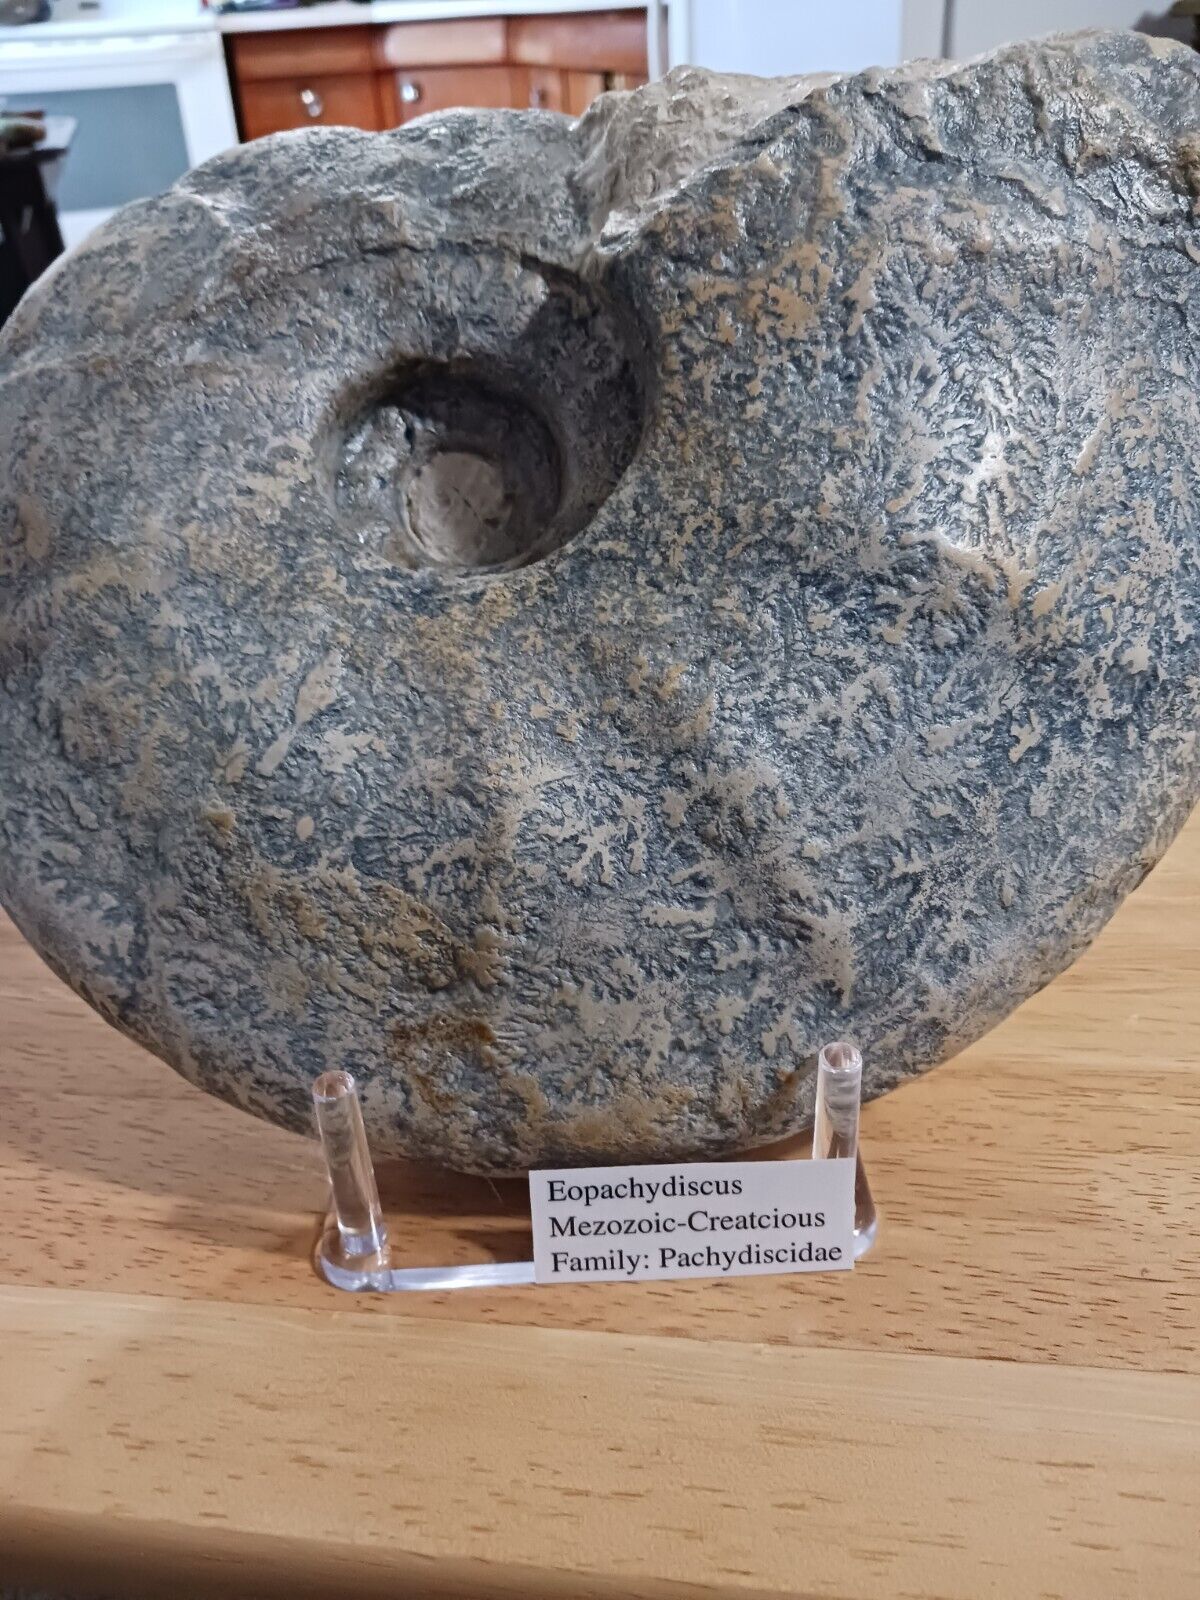 HUGE Eopachydiscus Ammonite from Texas with Supreme Sutures 22 Pounds